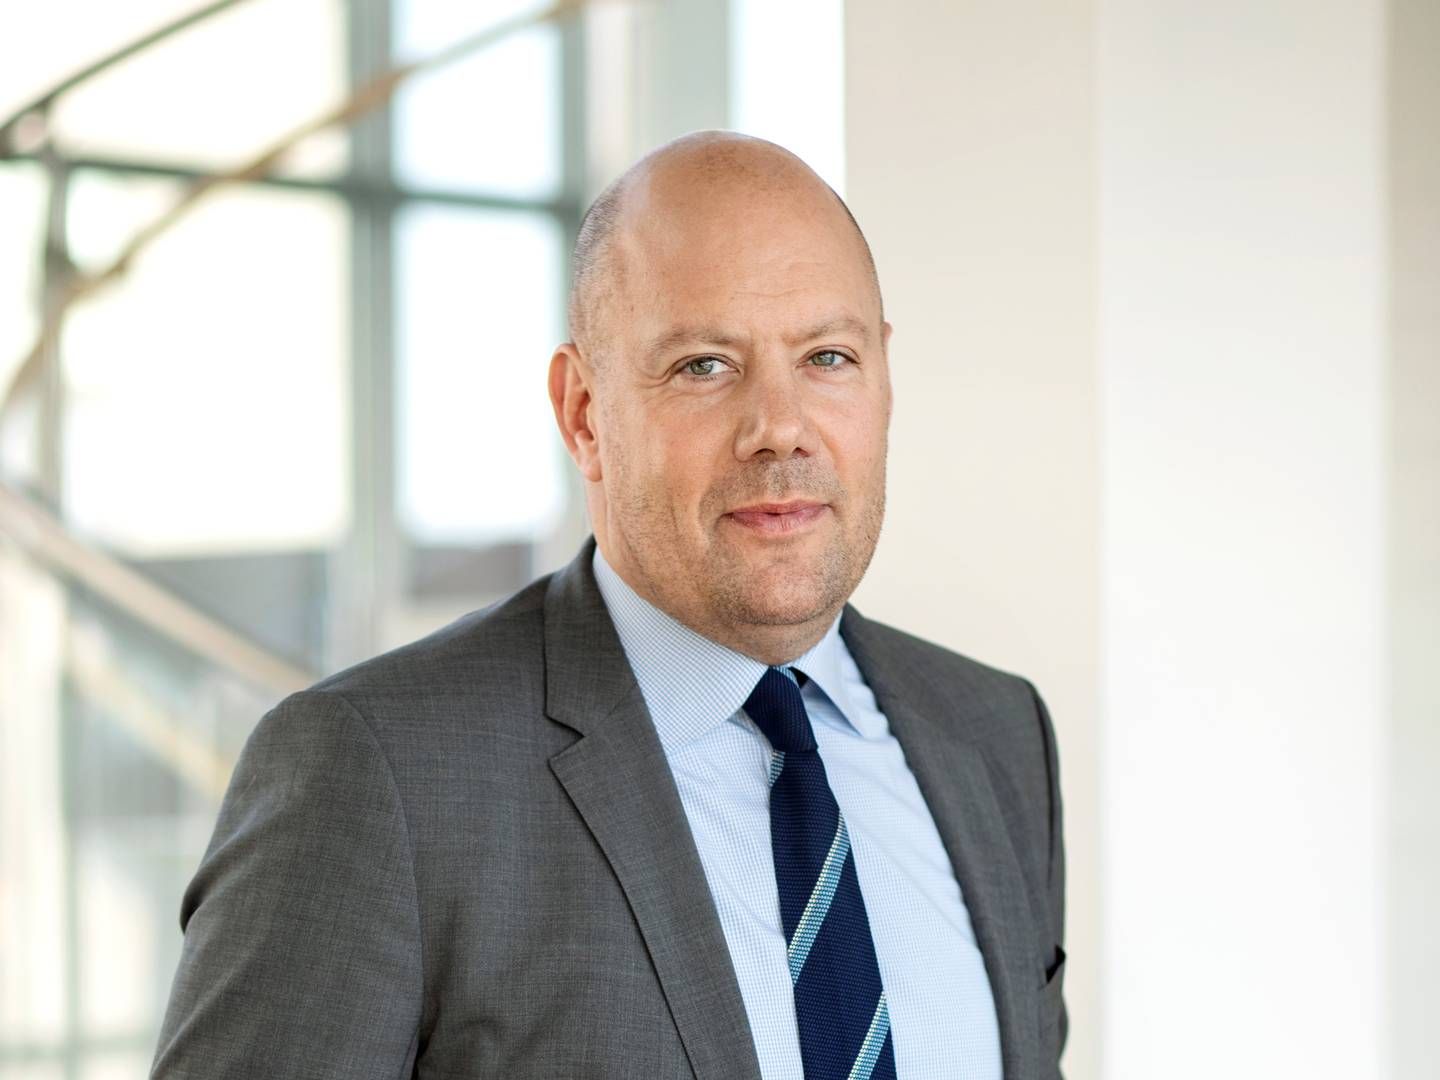 According to Jonas Söderberg of Insurance Sweden, the decrease in investment assets is mainly due to the downturn of the equity market. | Photo: Svensk Forsäkring